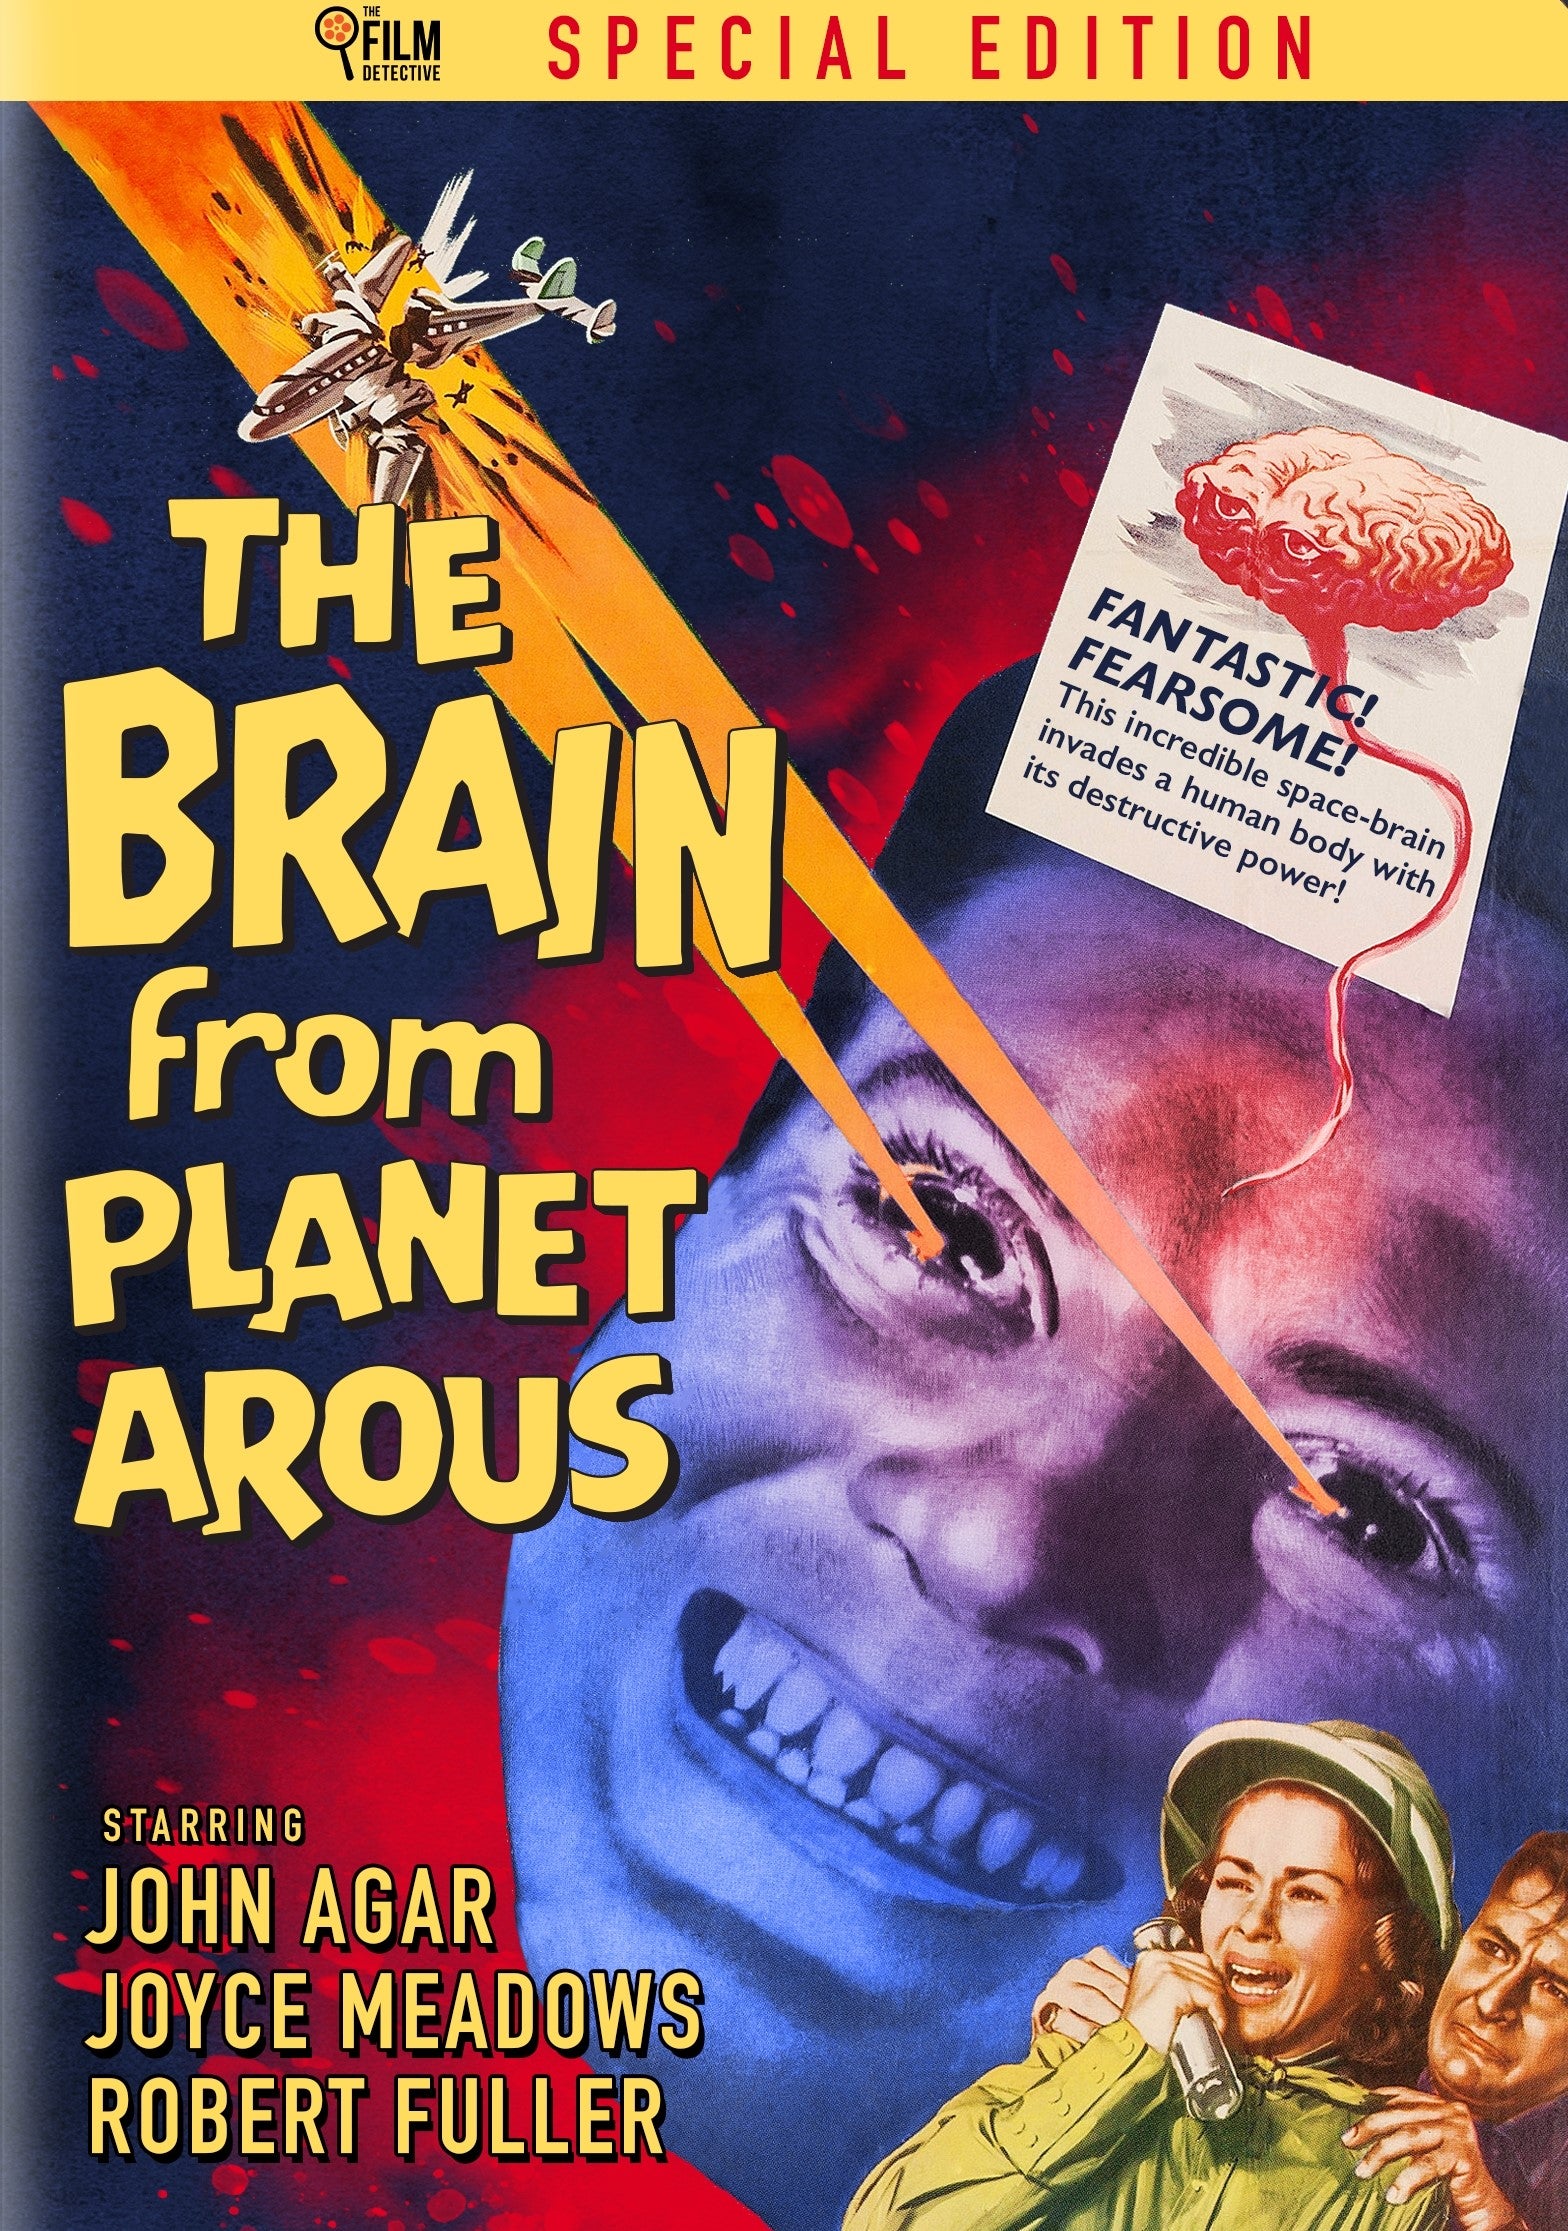 THE BRAIN FROM PLANET AROUS DVD